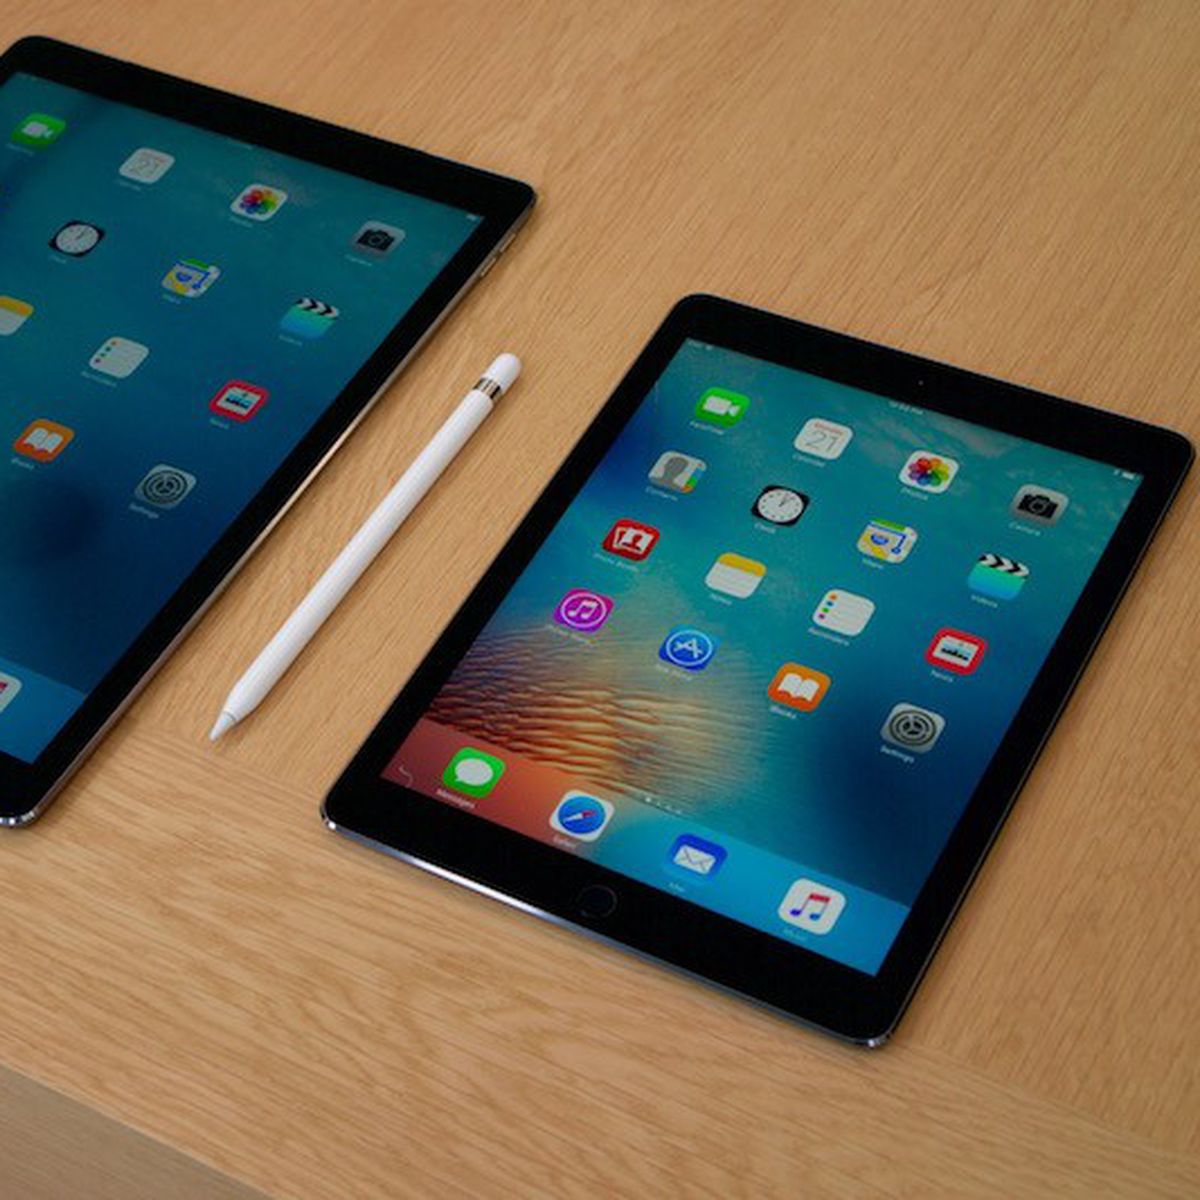 Review Roundup: 9.7 iPad Pro is a 'Powerful' Laptop Replacement